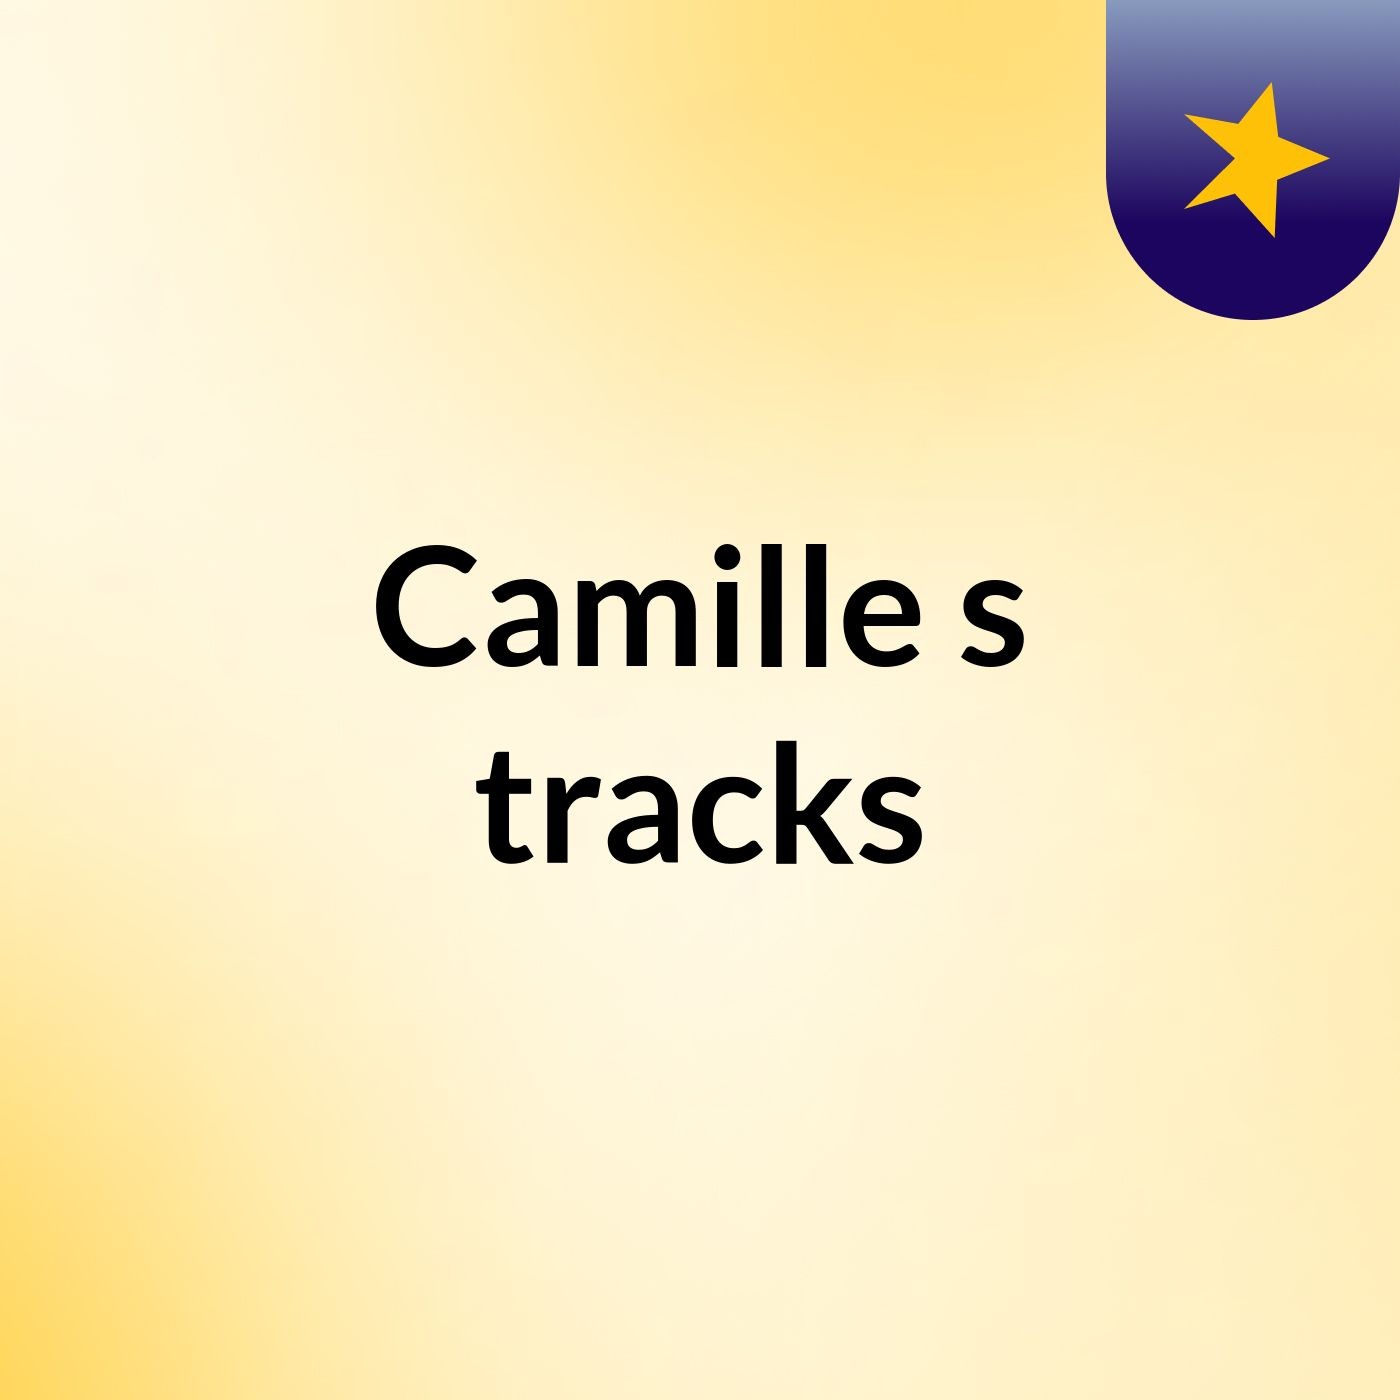 Camille's tracks